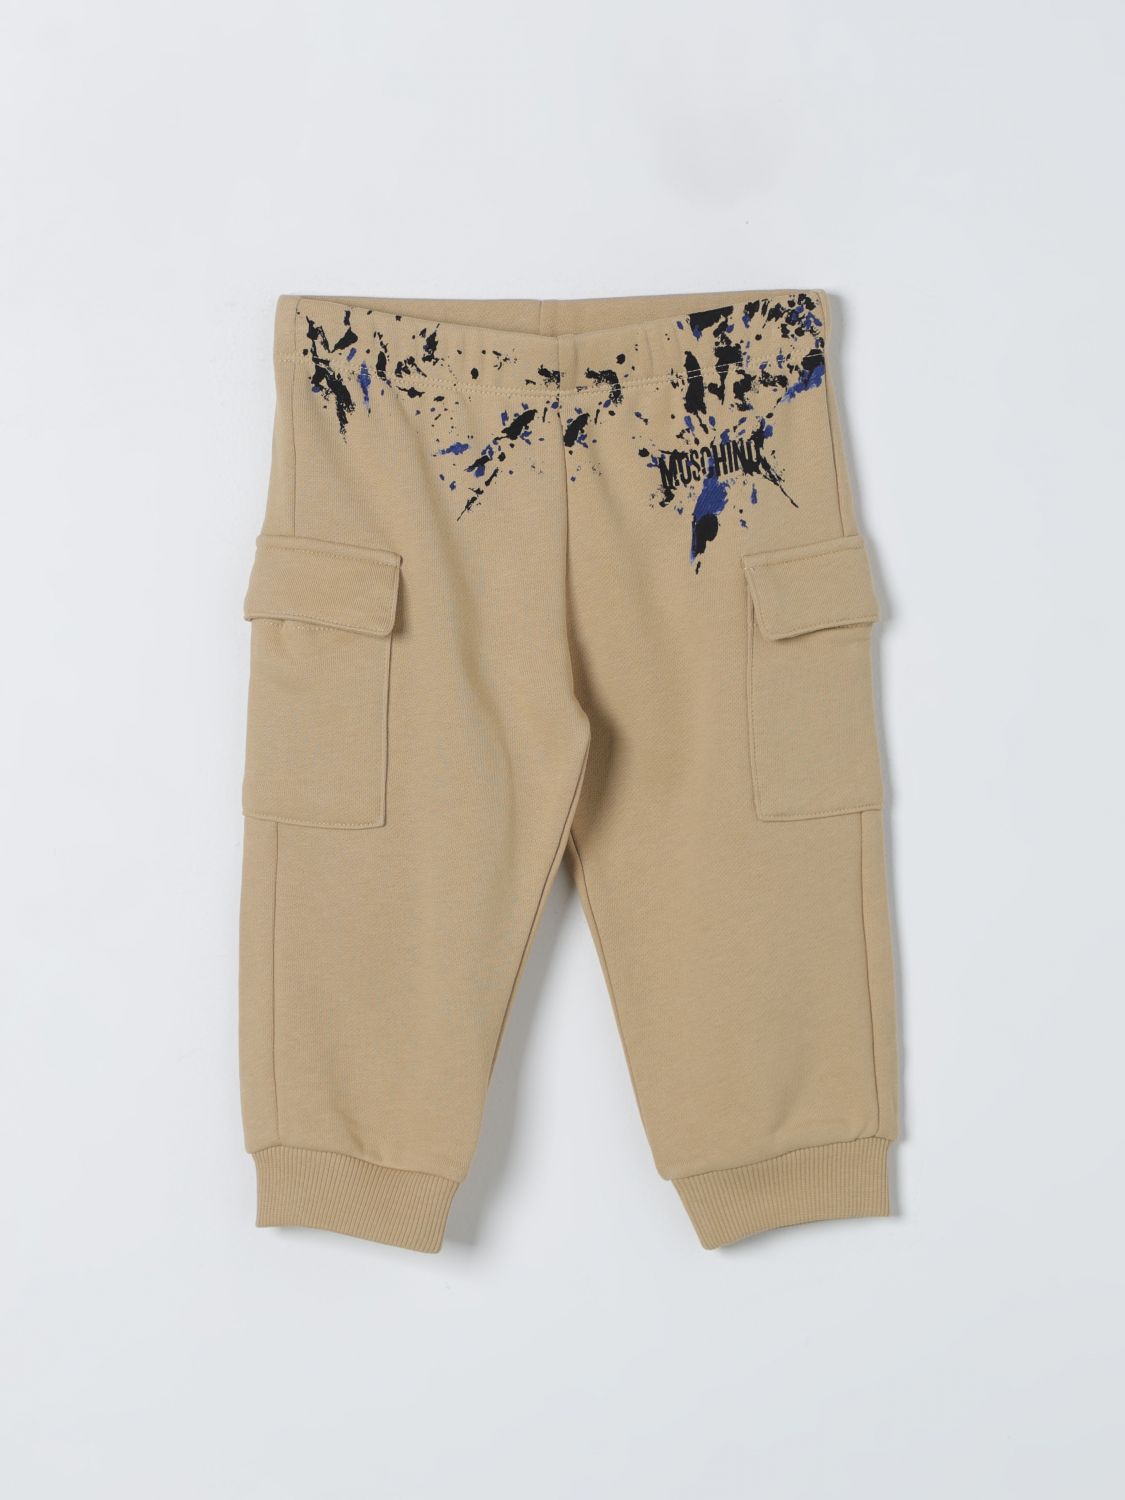 Shop Moschino Baby Pants  Kids Color Brown